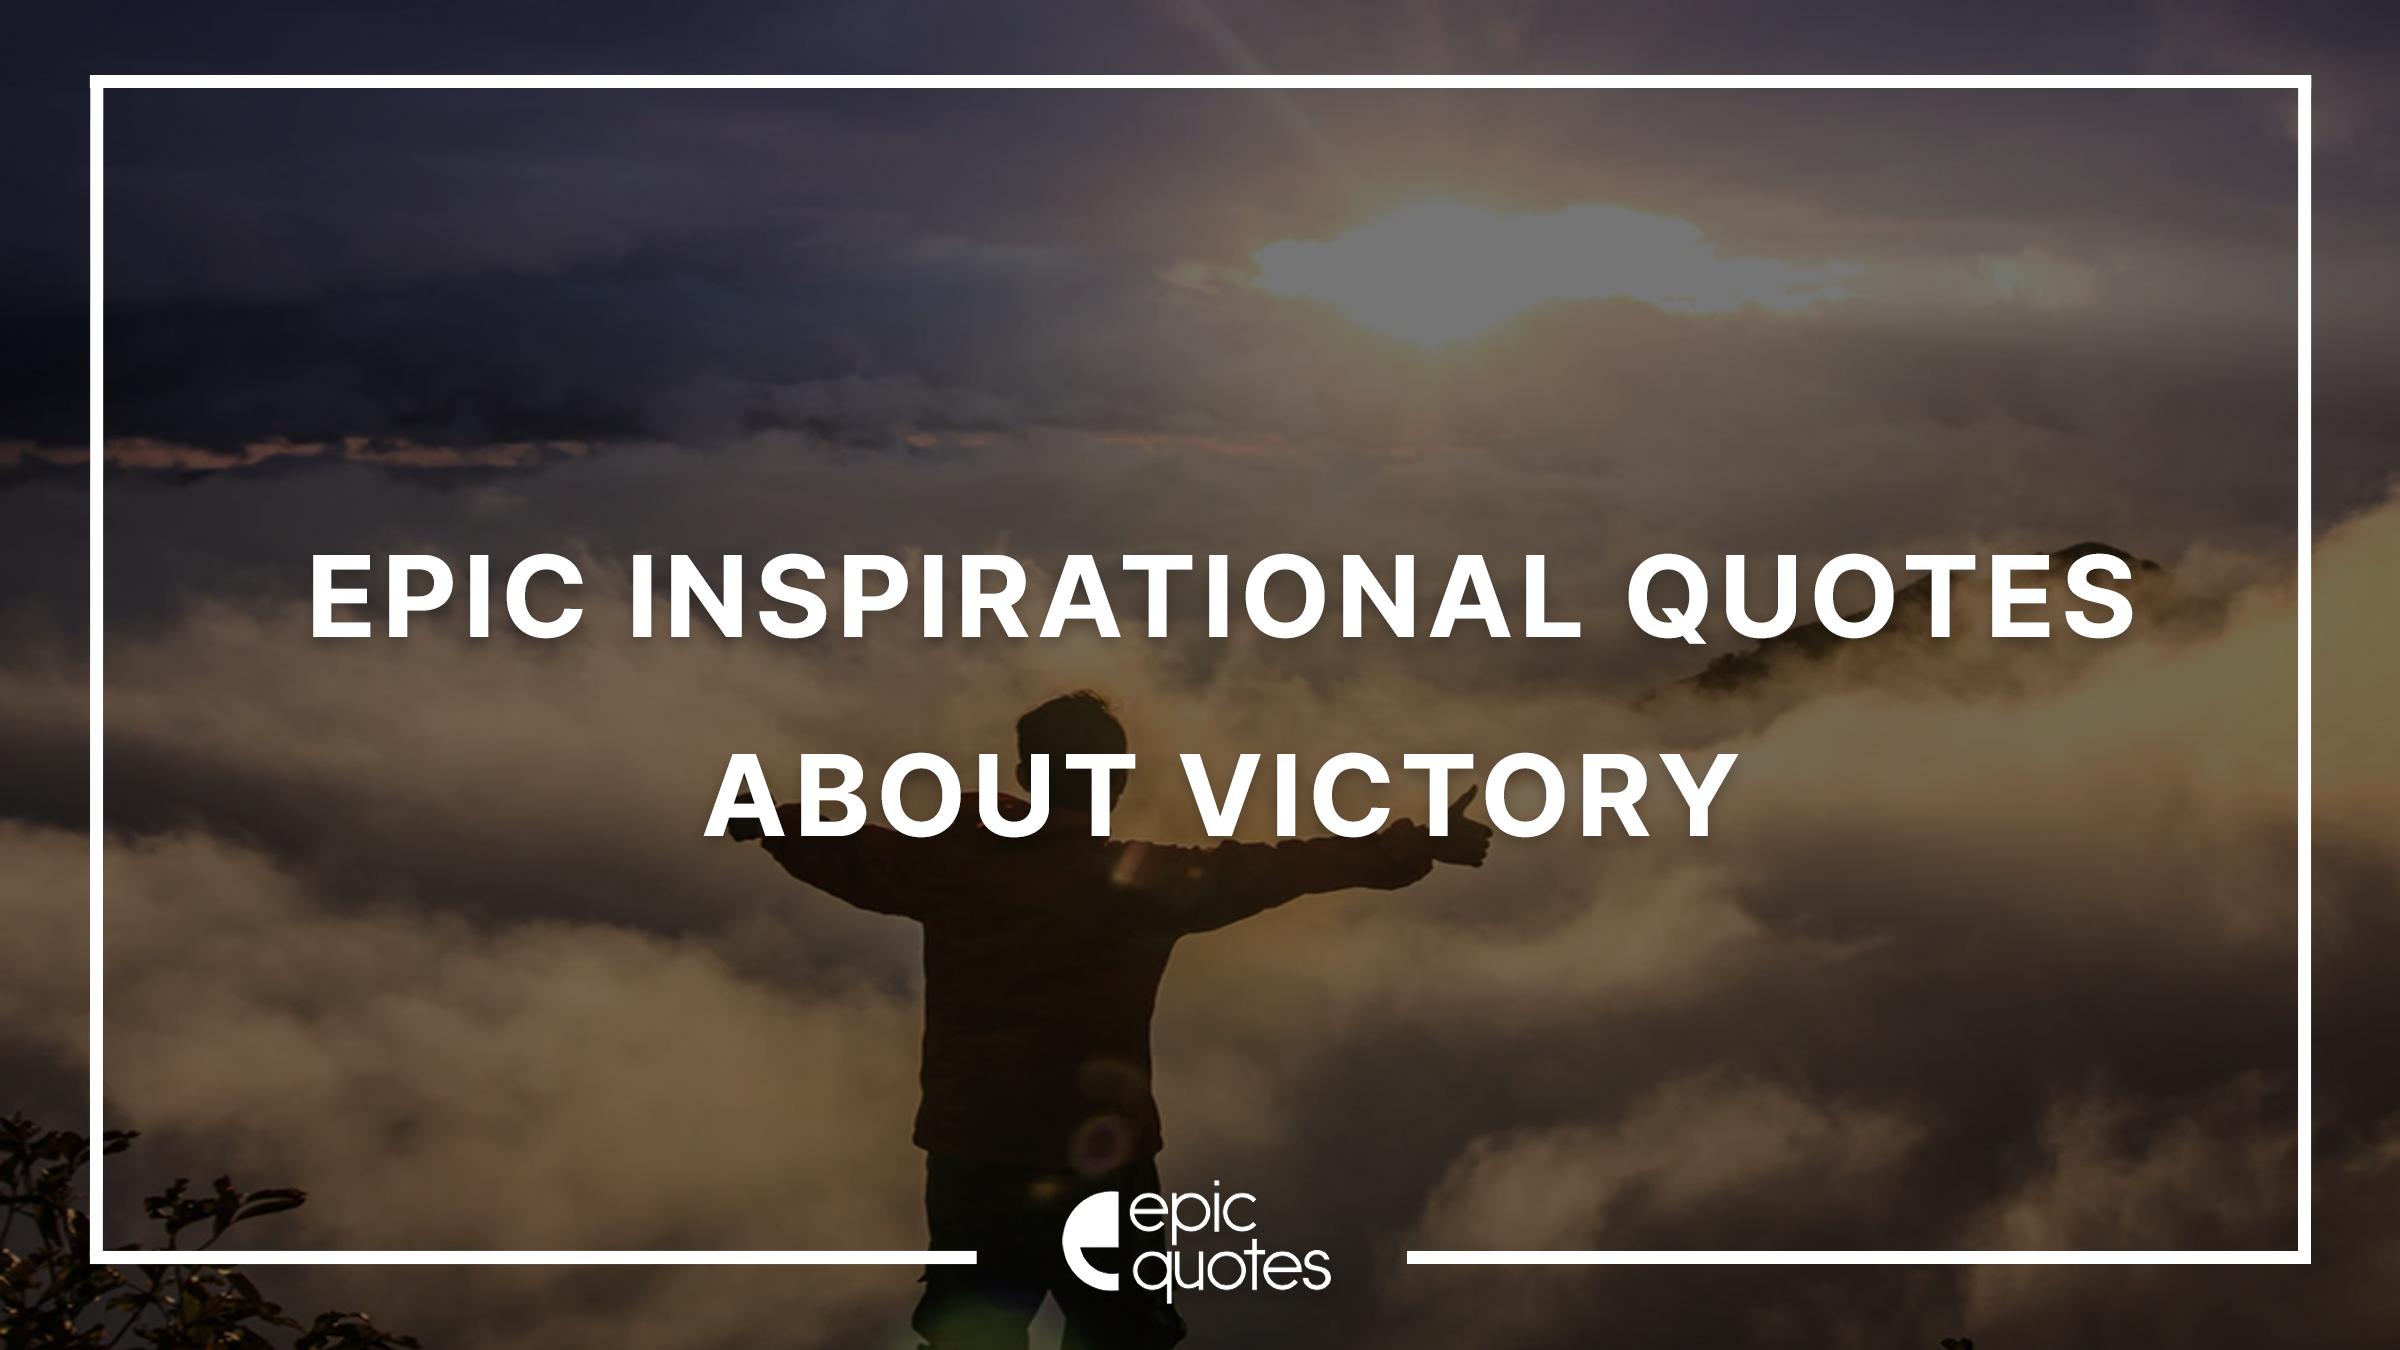 Epic Inspirational Quotes About Victory - Epic Quotes